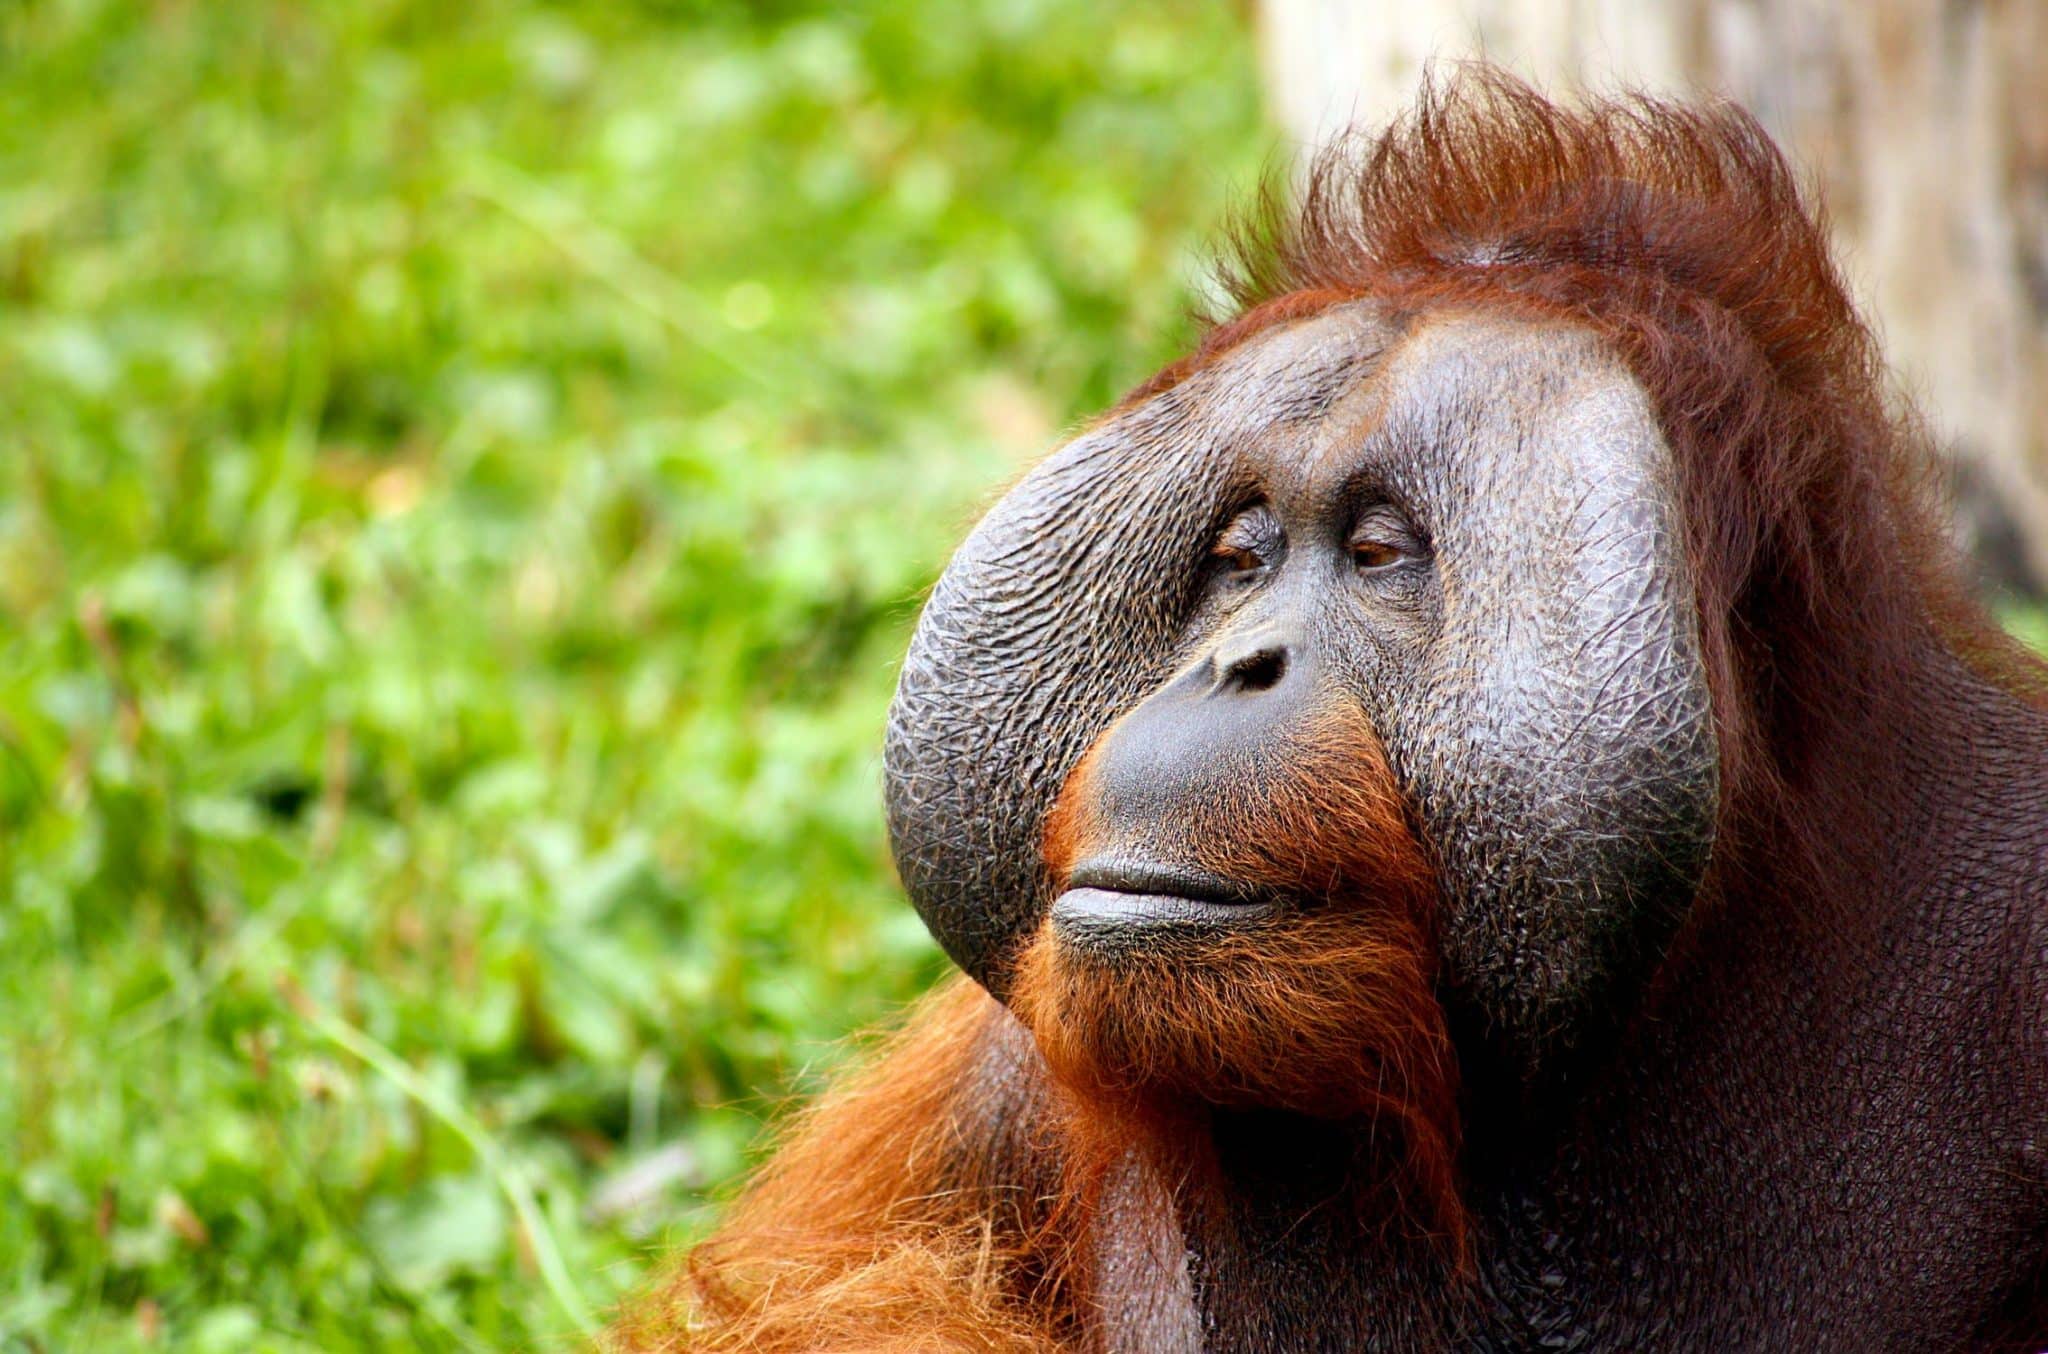 Best Places to See Orangutans